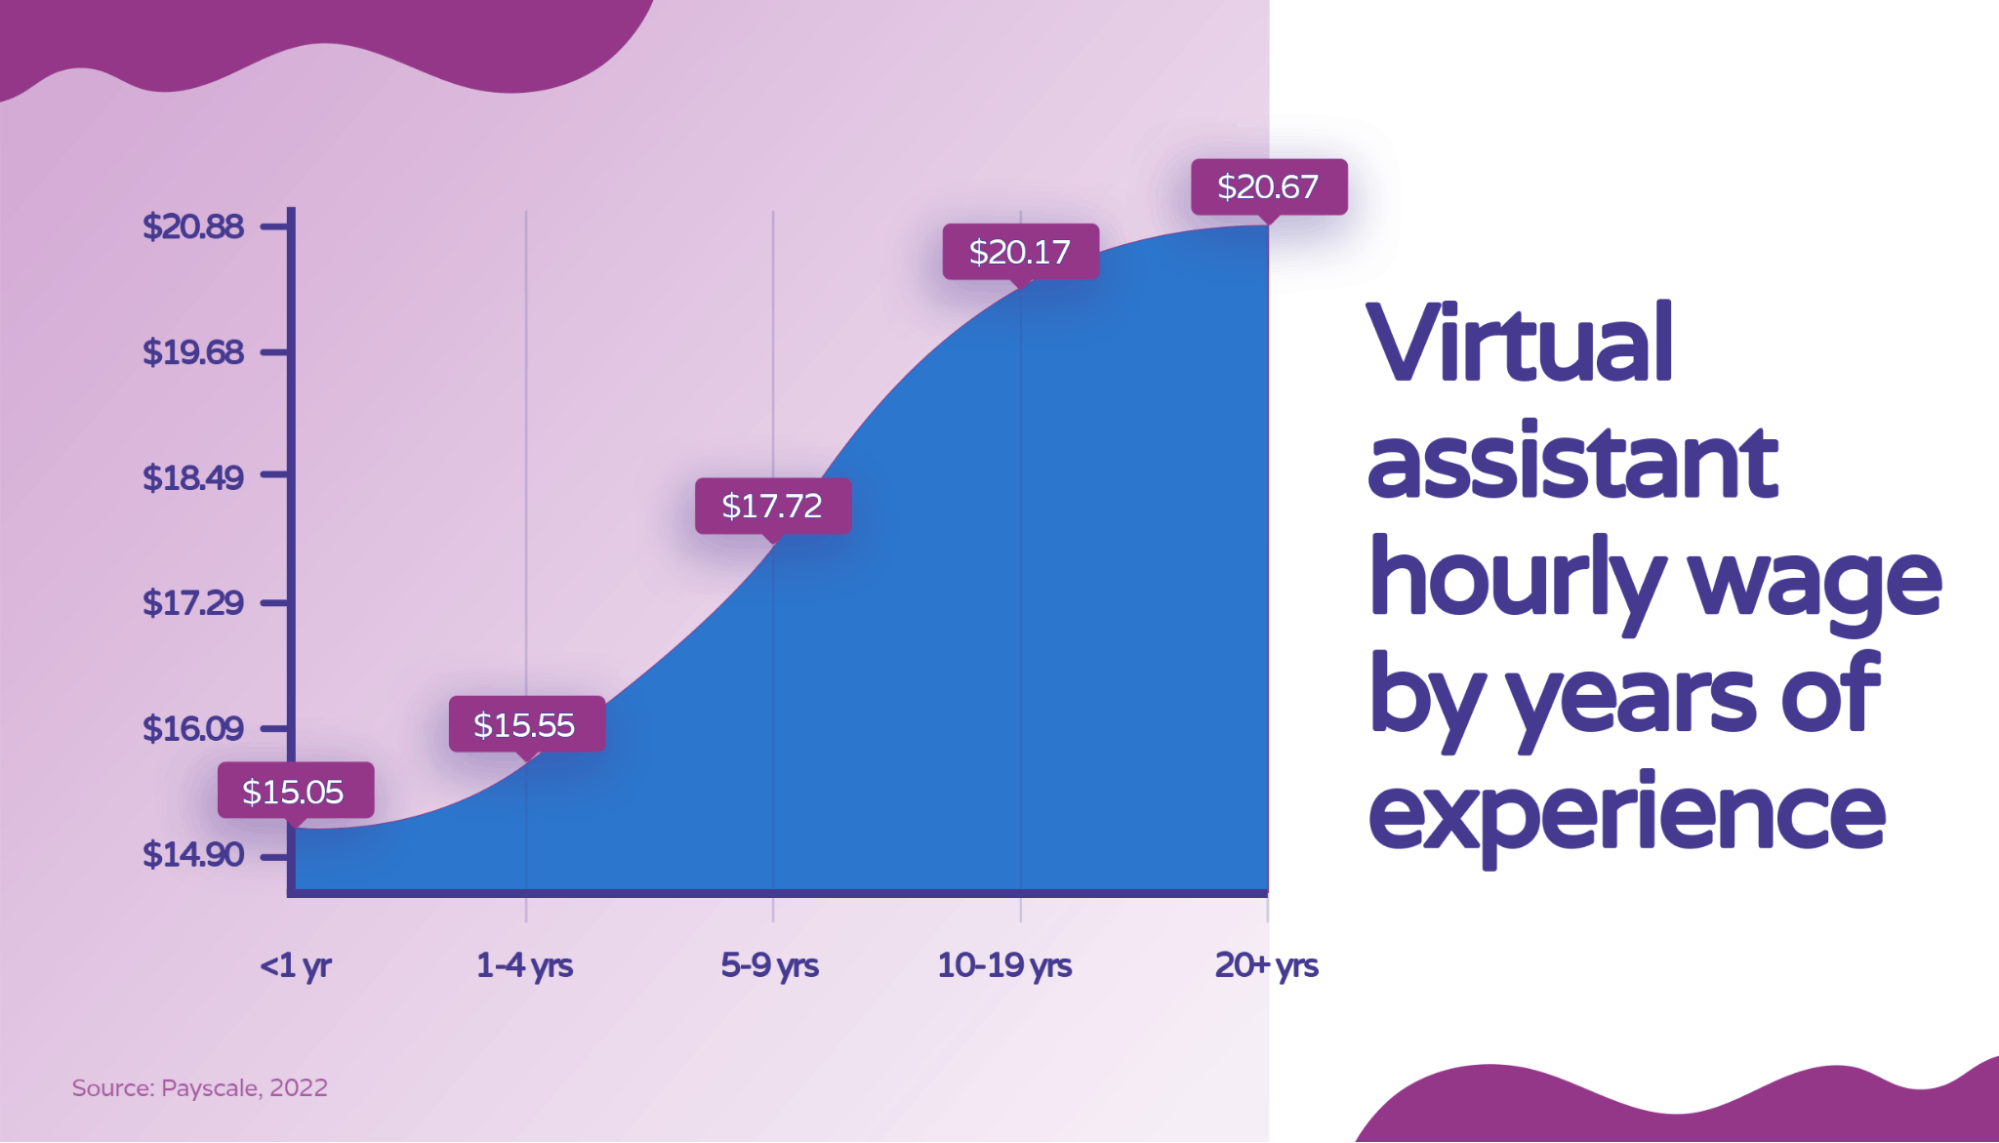 Graph showing the hourly wage of virtual assistants based on their years of experience